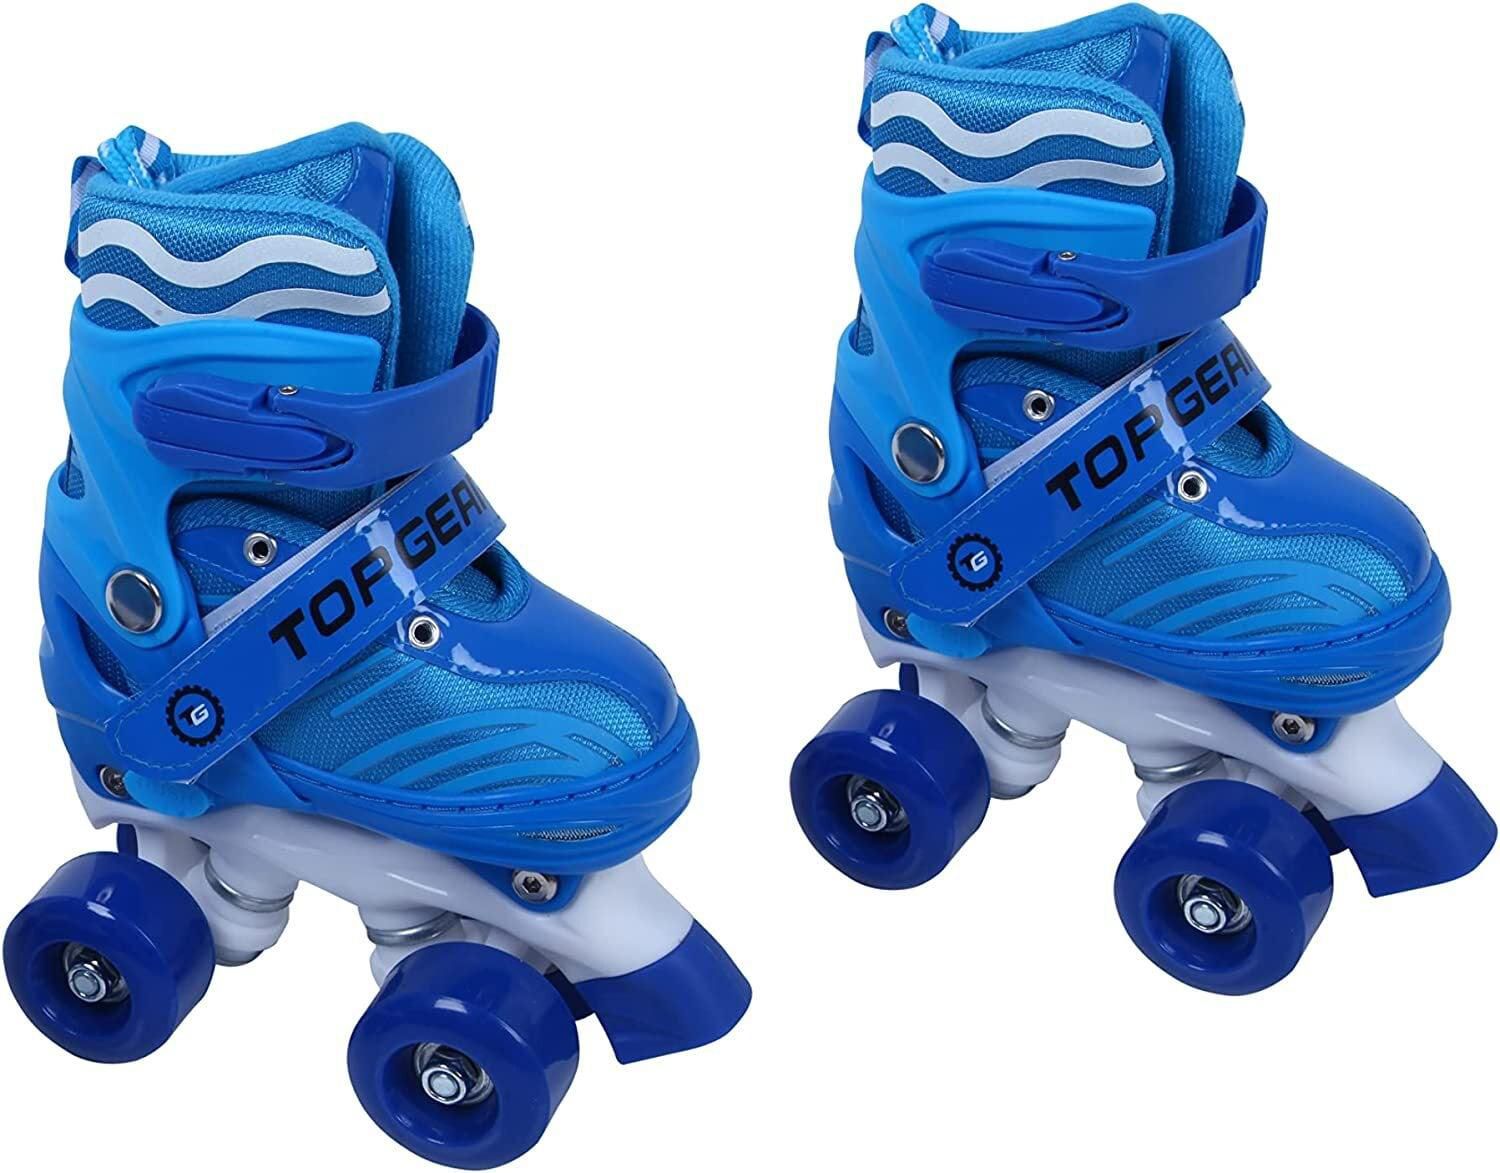 Top Gear Roller Skates Shoes, TG 9008, Adjustable For Kids, Double Row 4 Wheel With All Wheels, Fun For Kids, Blue, Large